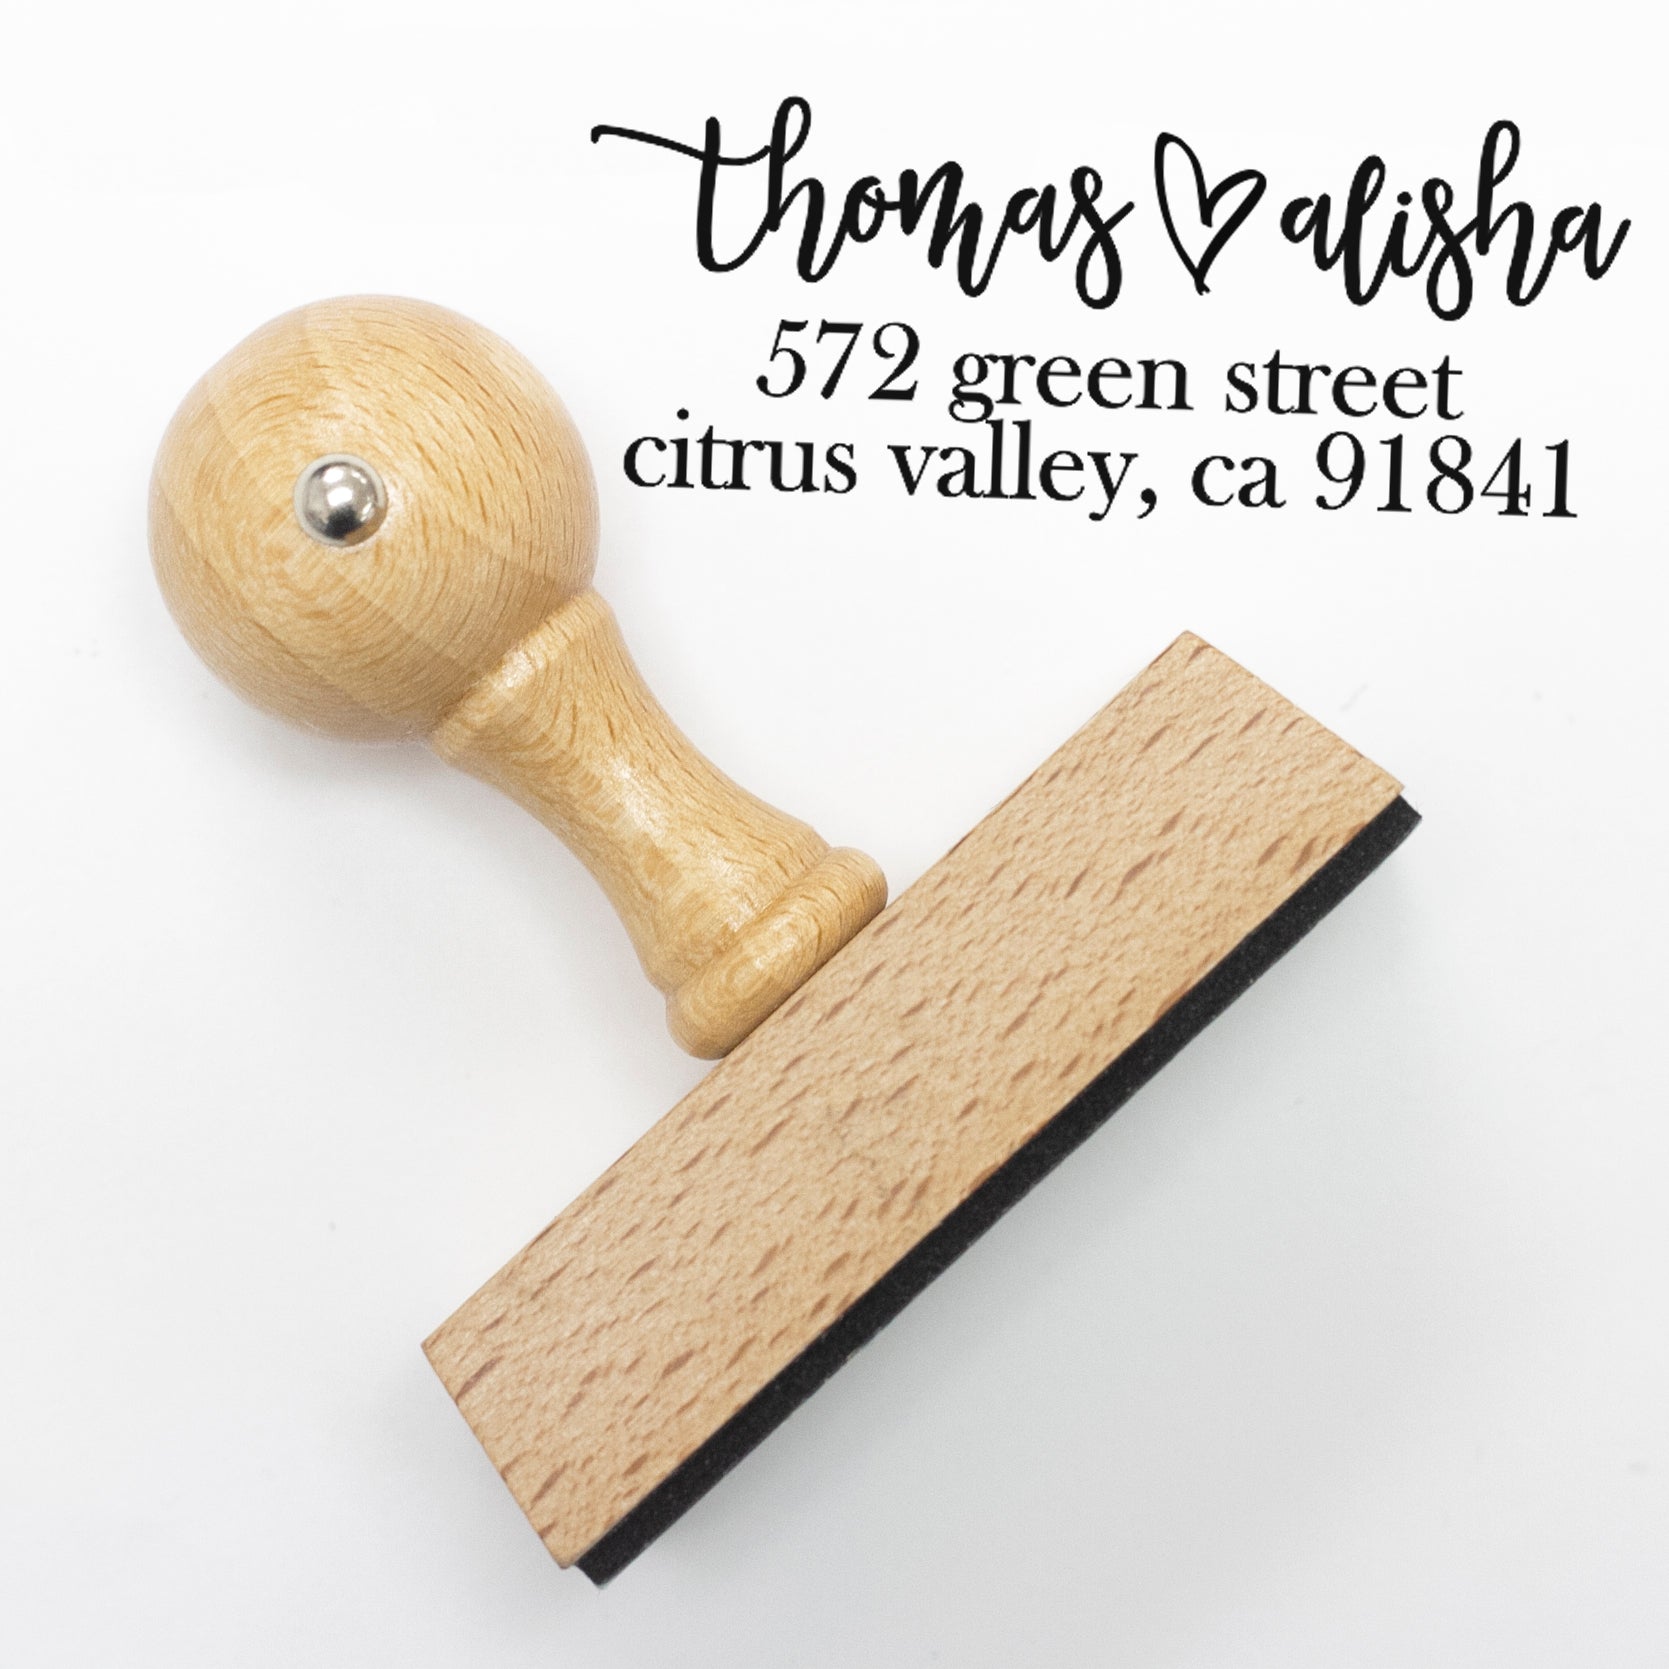 Custom Personalized Stamp - Personalized Traditional Wood Handle Rubber